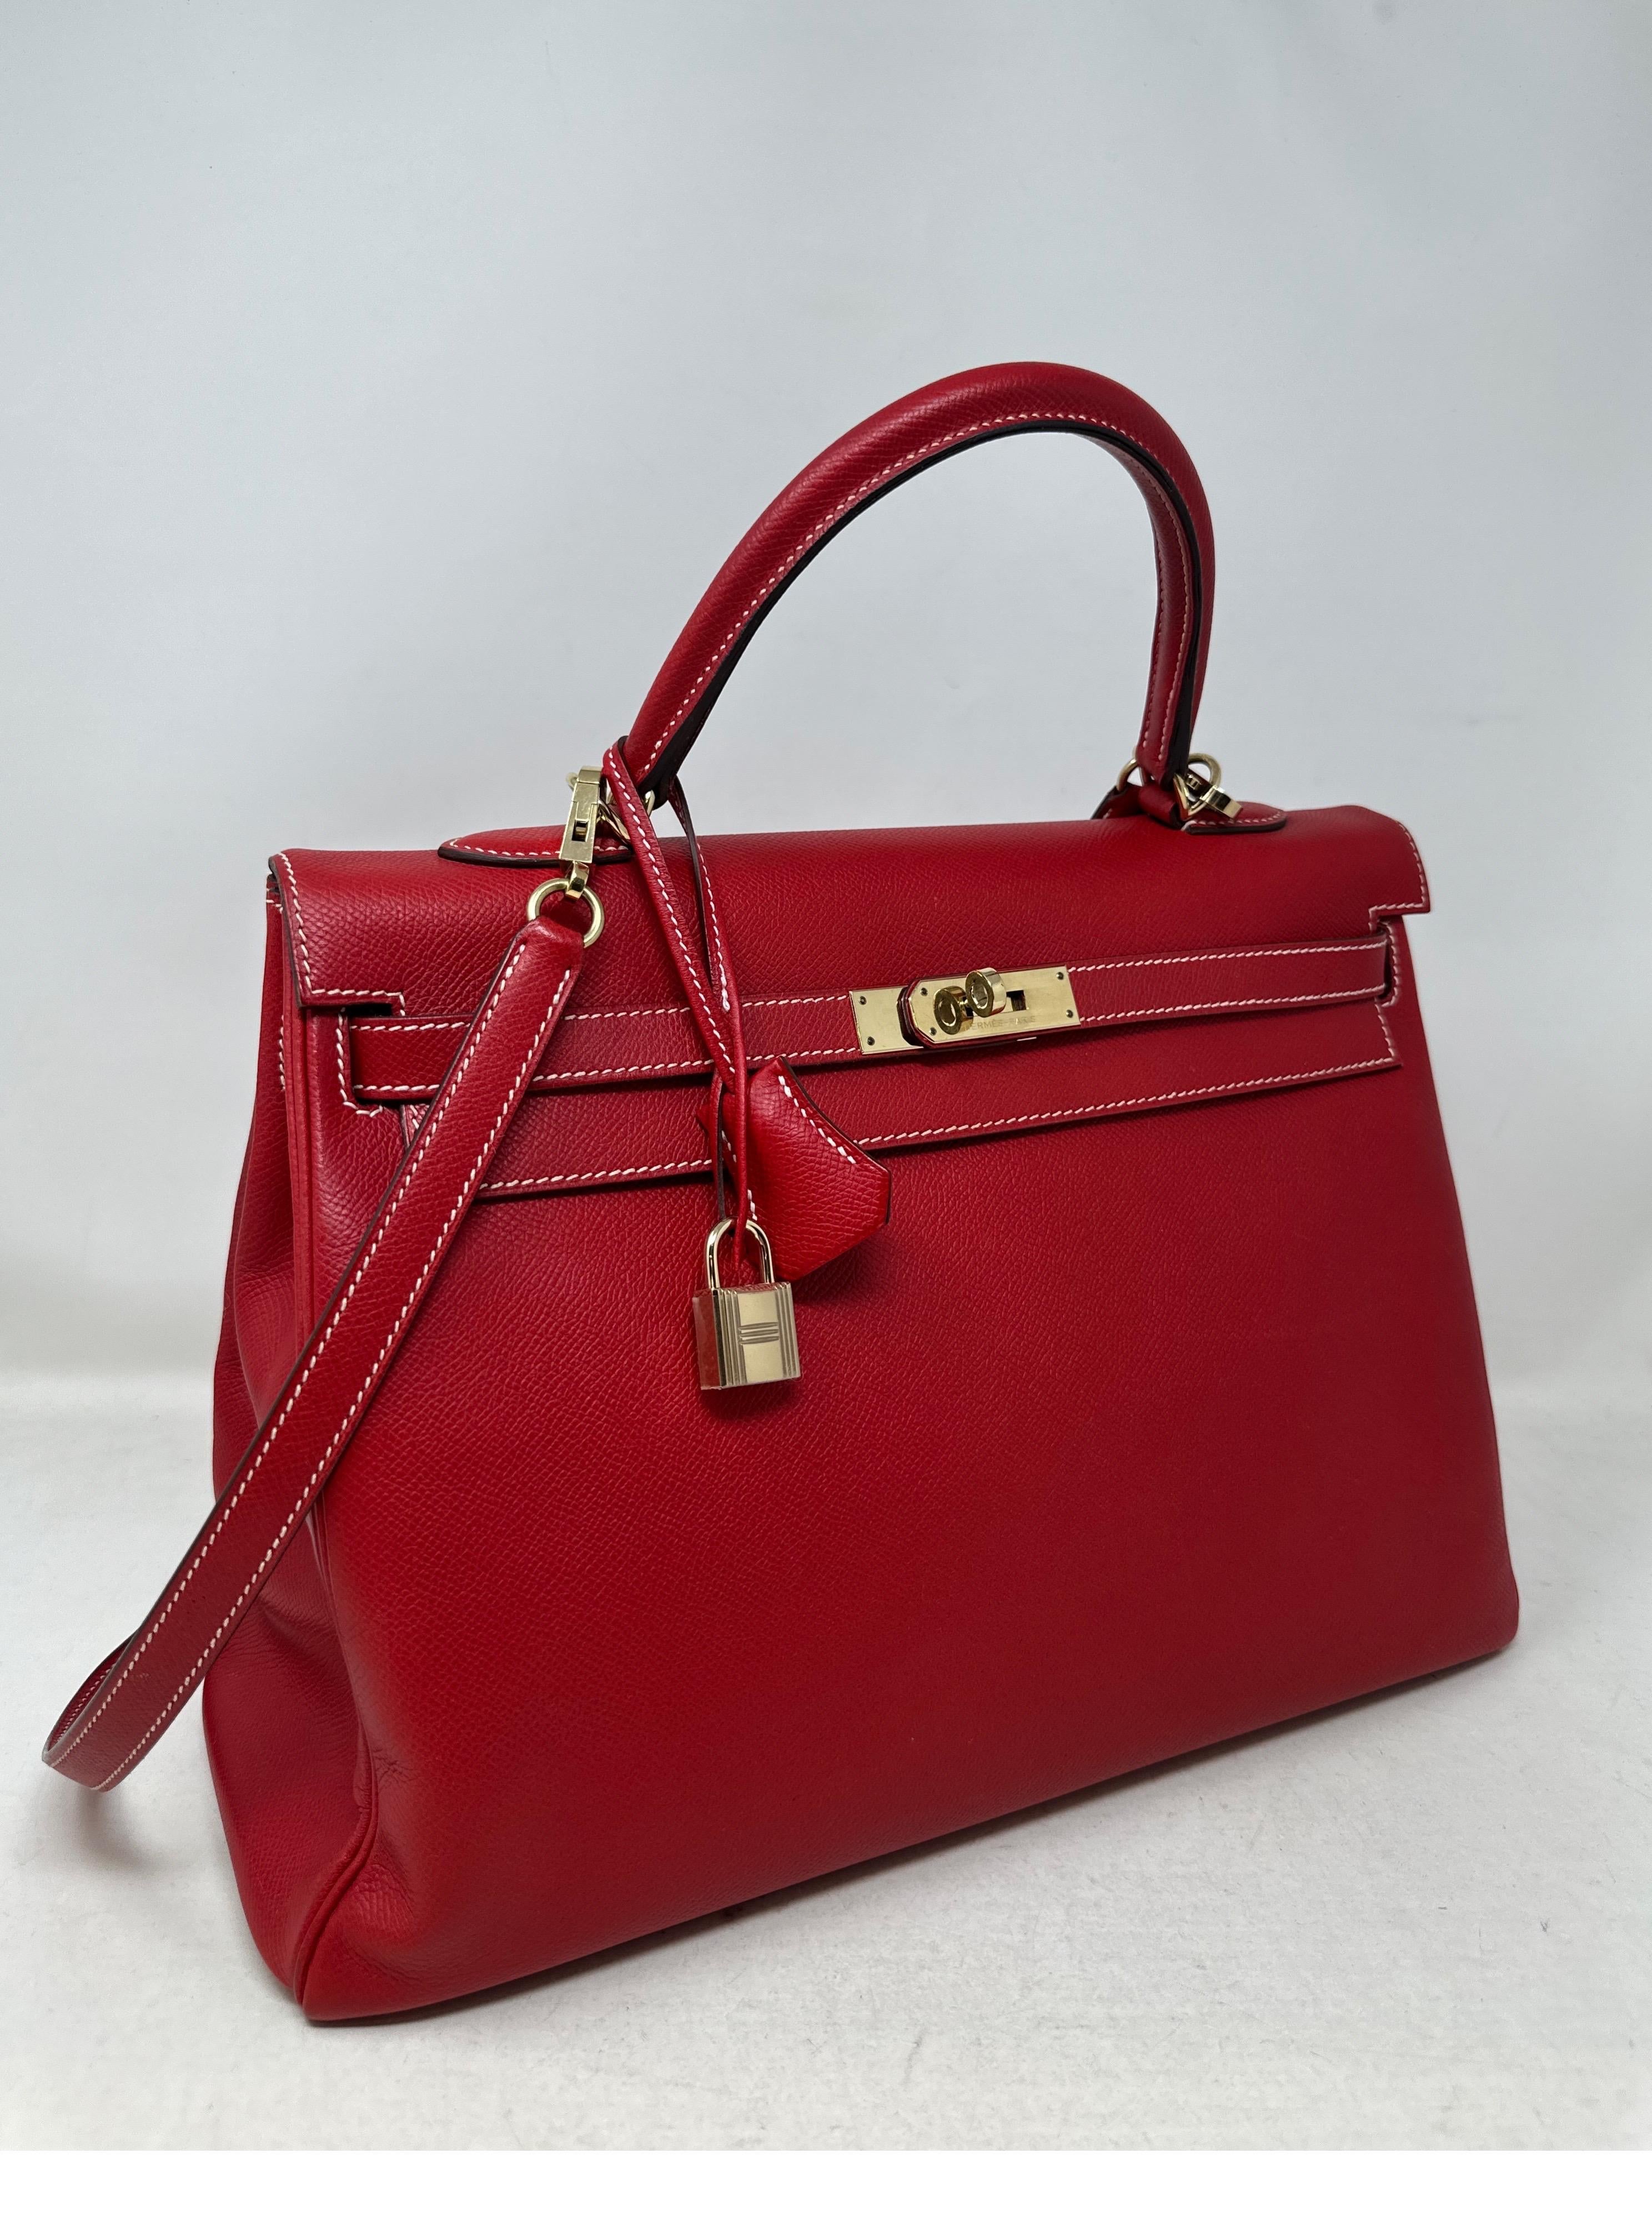 Hermes Rouge Casaque Candy Kelly 35 Bag  In Excellent Condition For Sale In Athens, GA